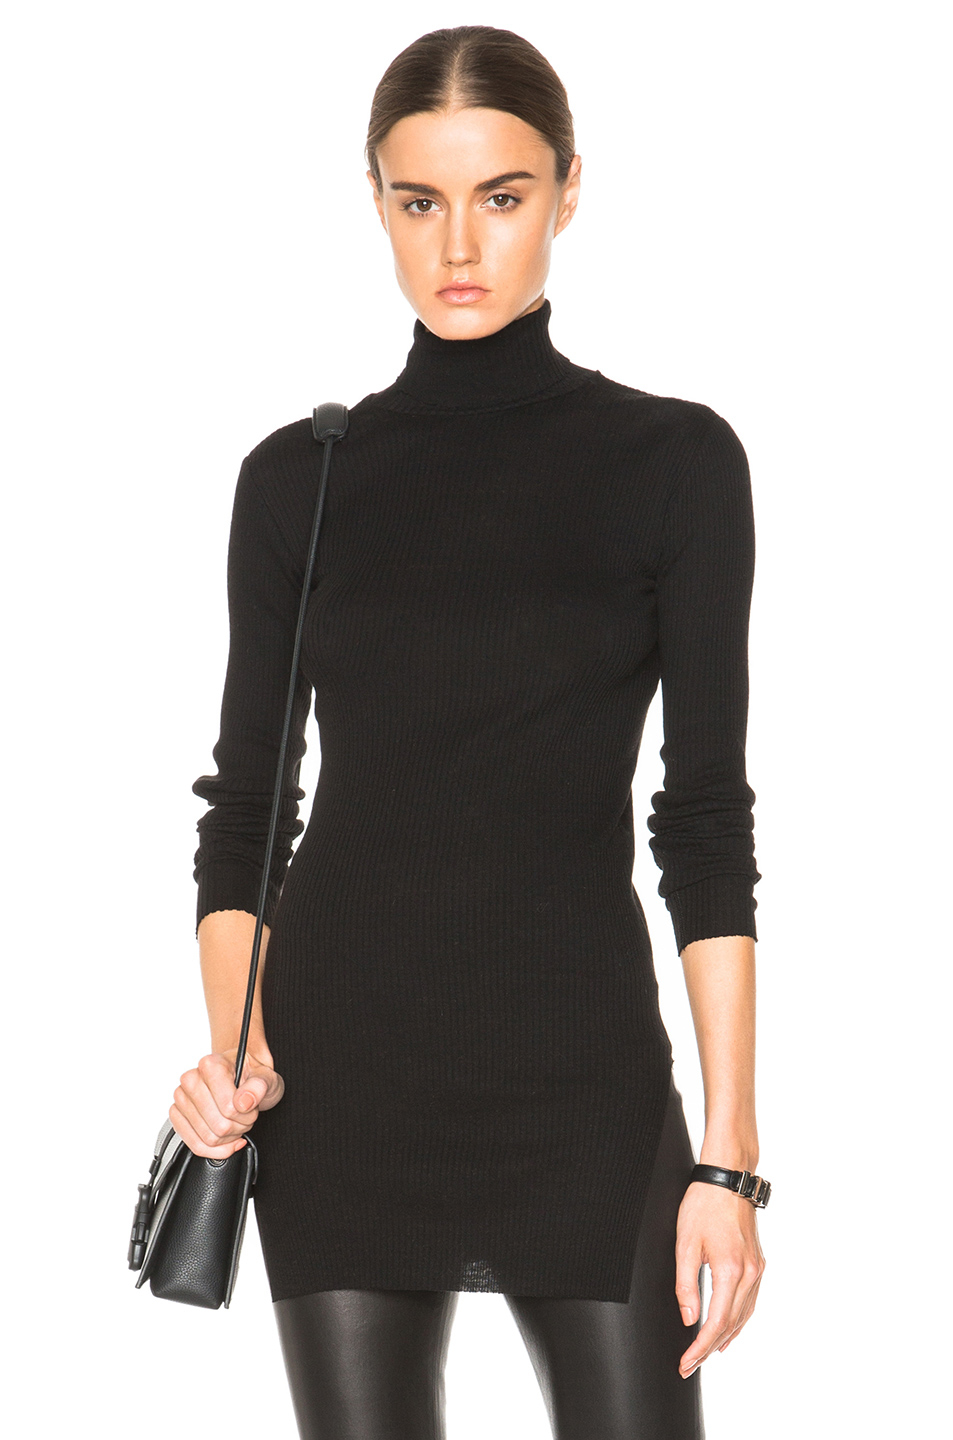 Lyst - Helmut Lang Fitted Turtleneck Sweater in Black